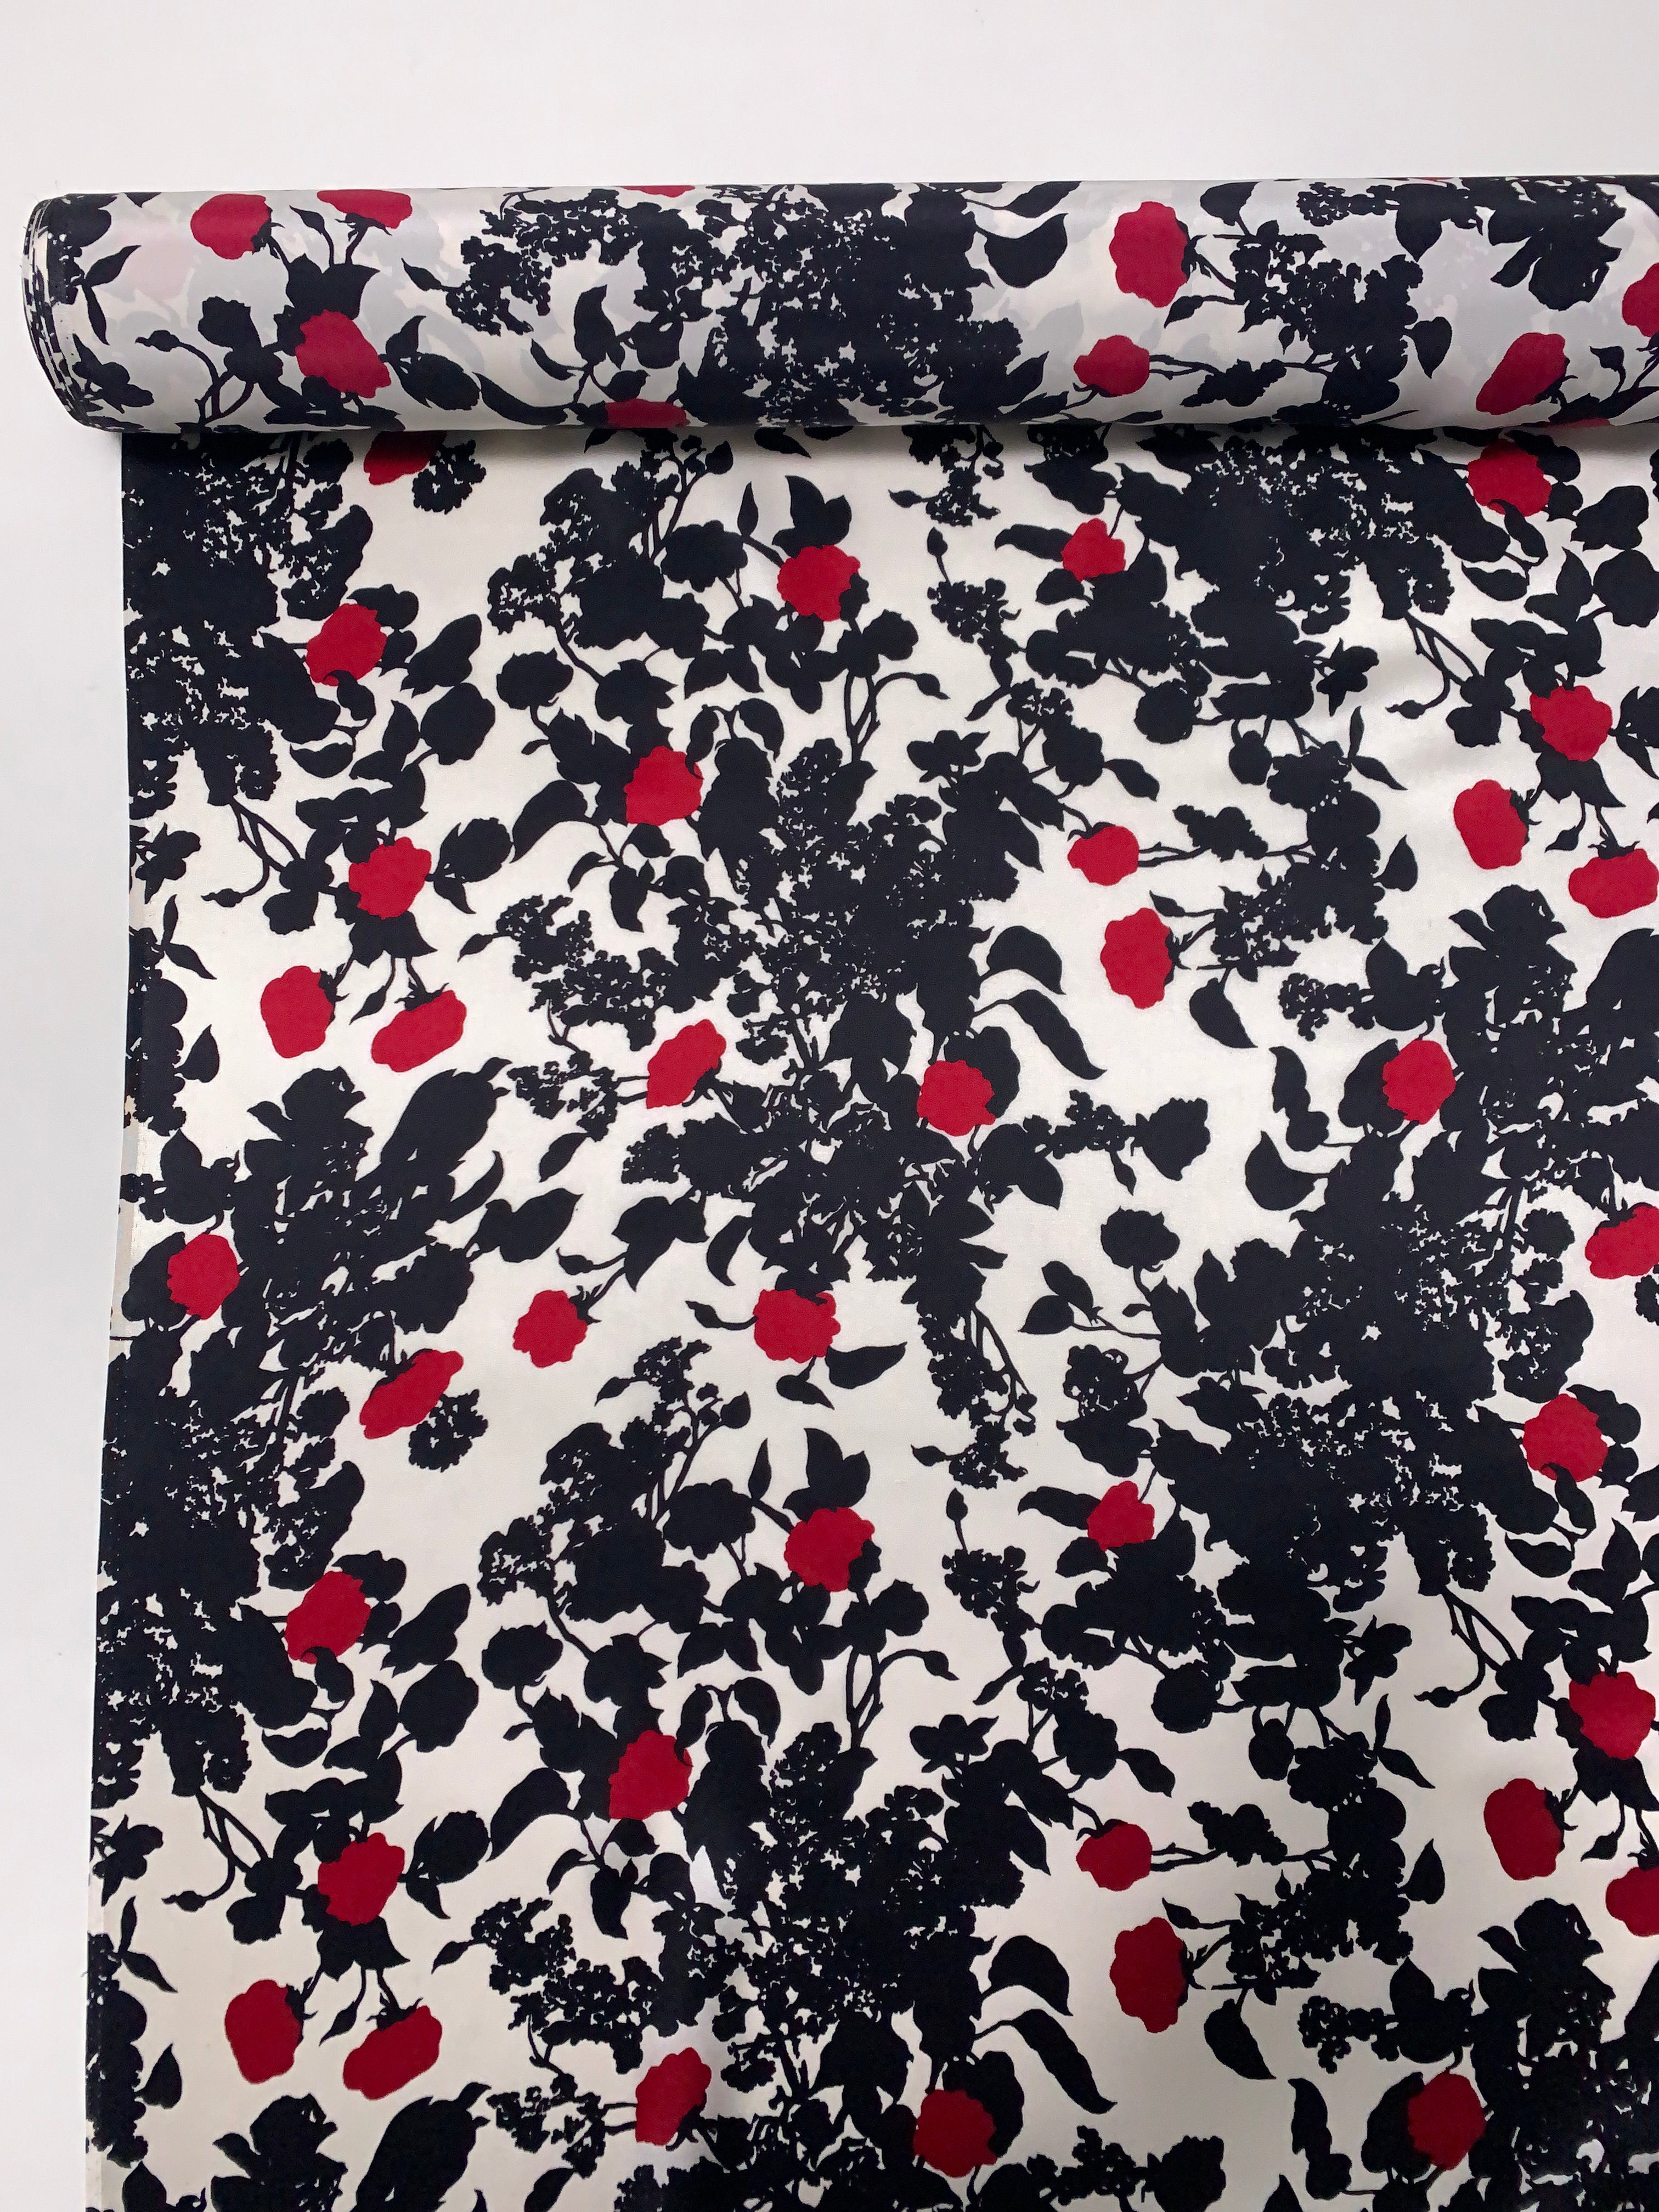 Romantic Floral Silhouette Printed Silk Charmeuse - Black / White / Cherry Red